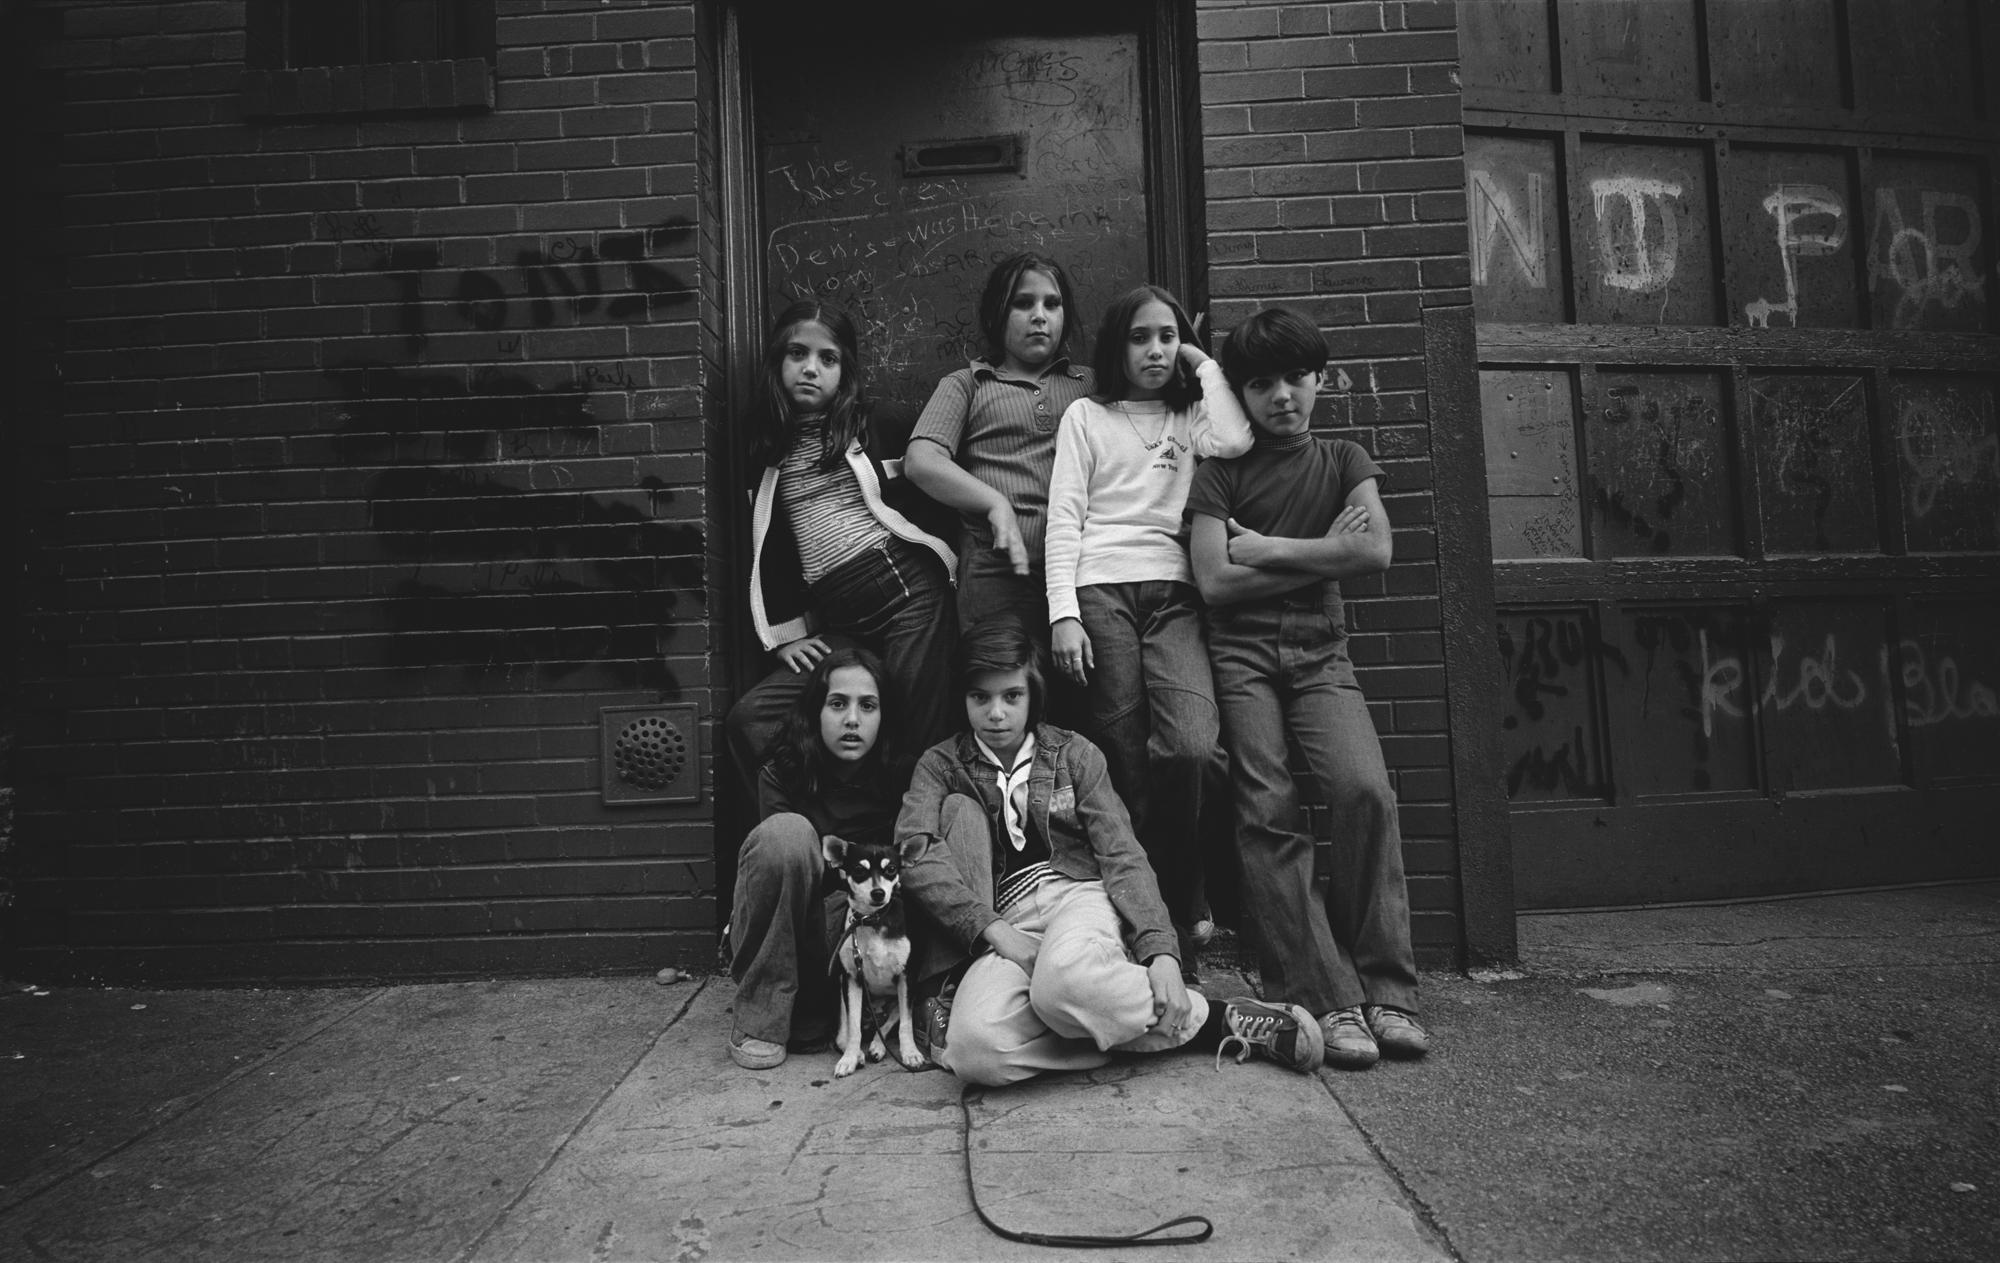 Frankie and the Prince Street Girls, 1975